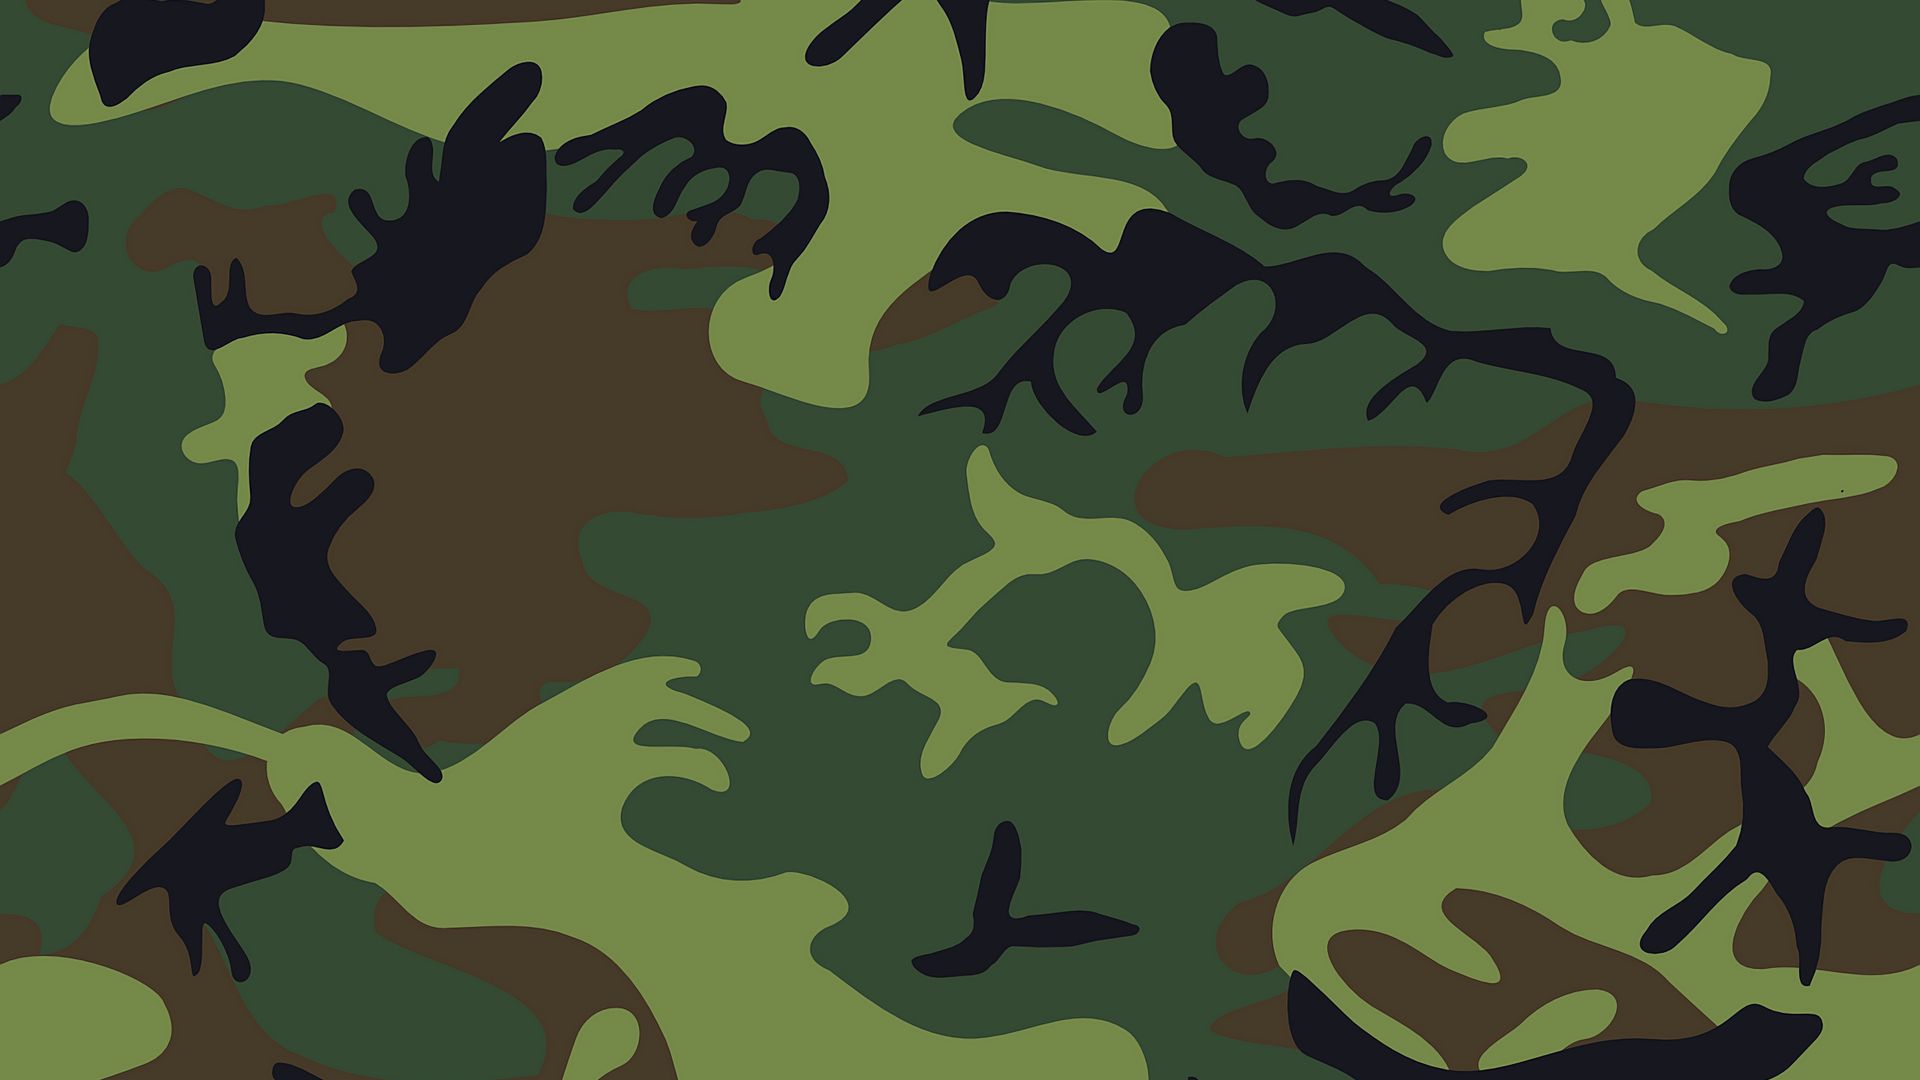 Download wallpaper 1920x1080 camouflage, military, patterns, texture, green full hd, hdtv, fhd, 1080p HD background